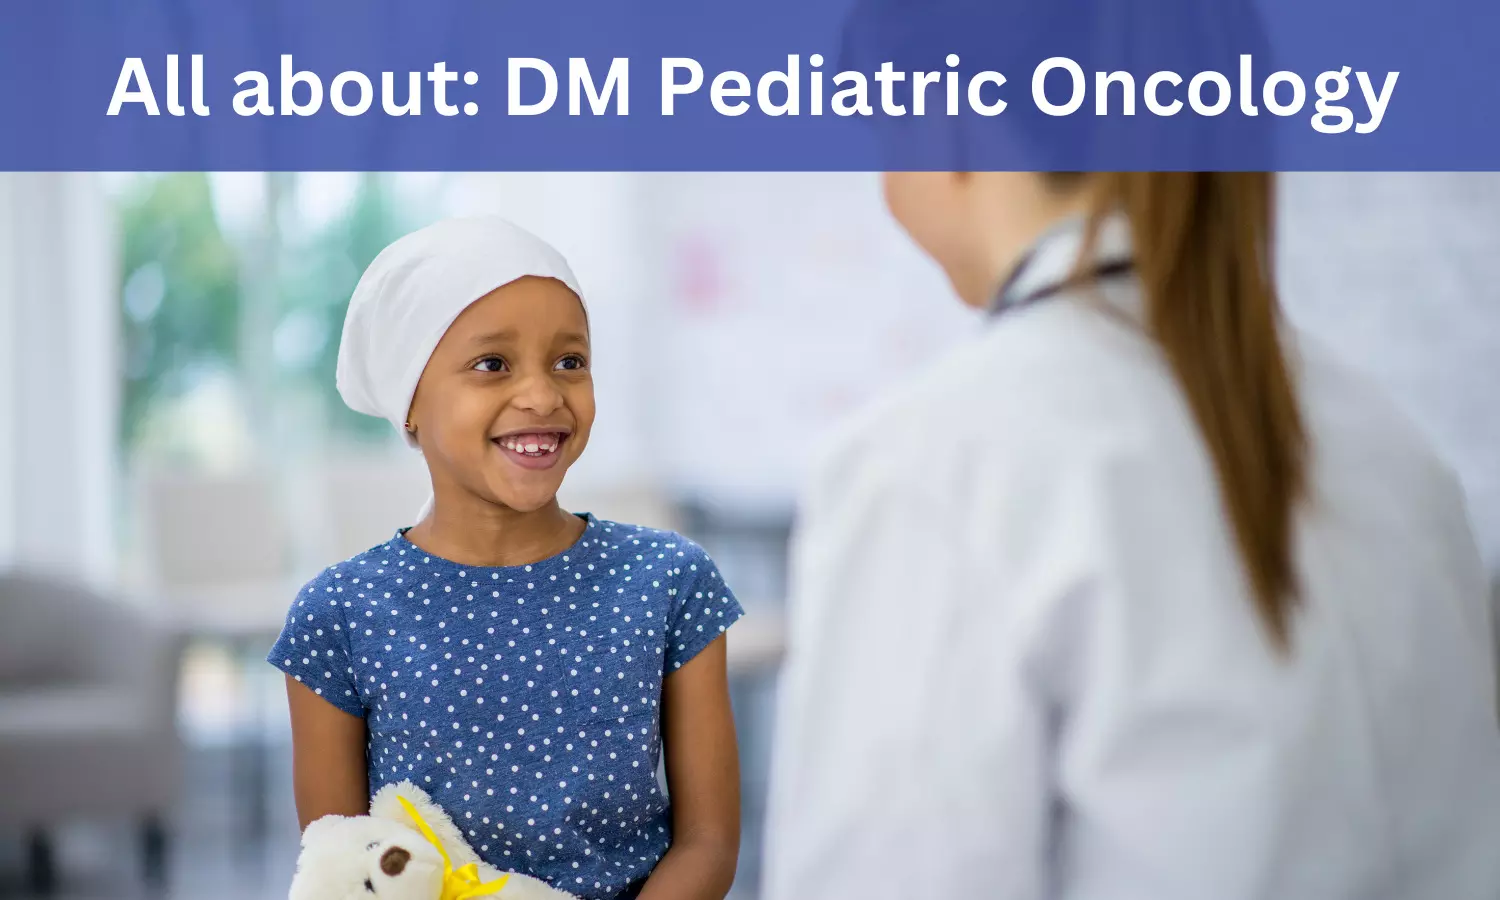 DM Pediatric Oncology: Admissions, Medical Colleges, Eligibility Criteria, fee details